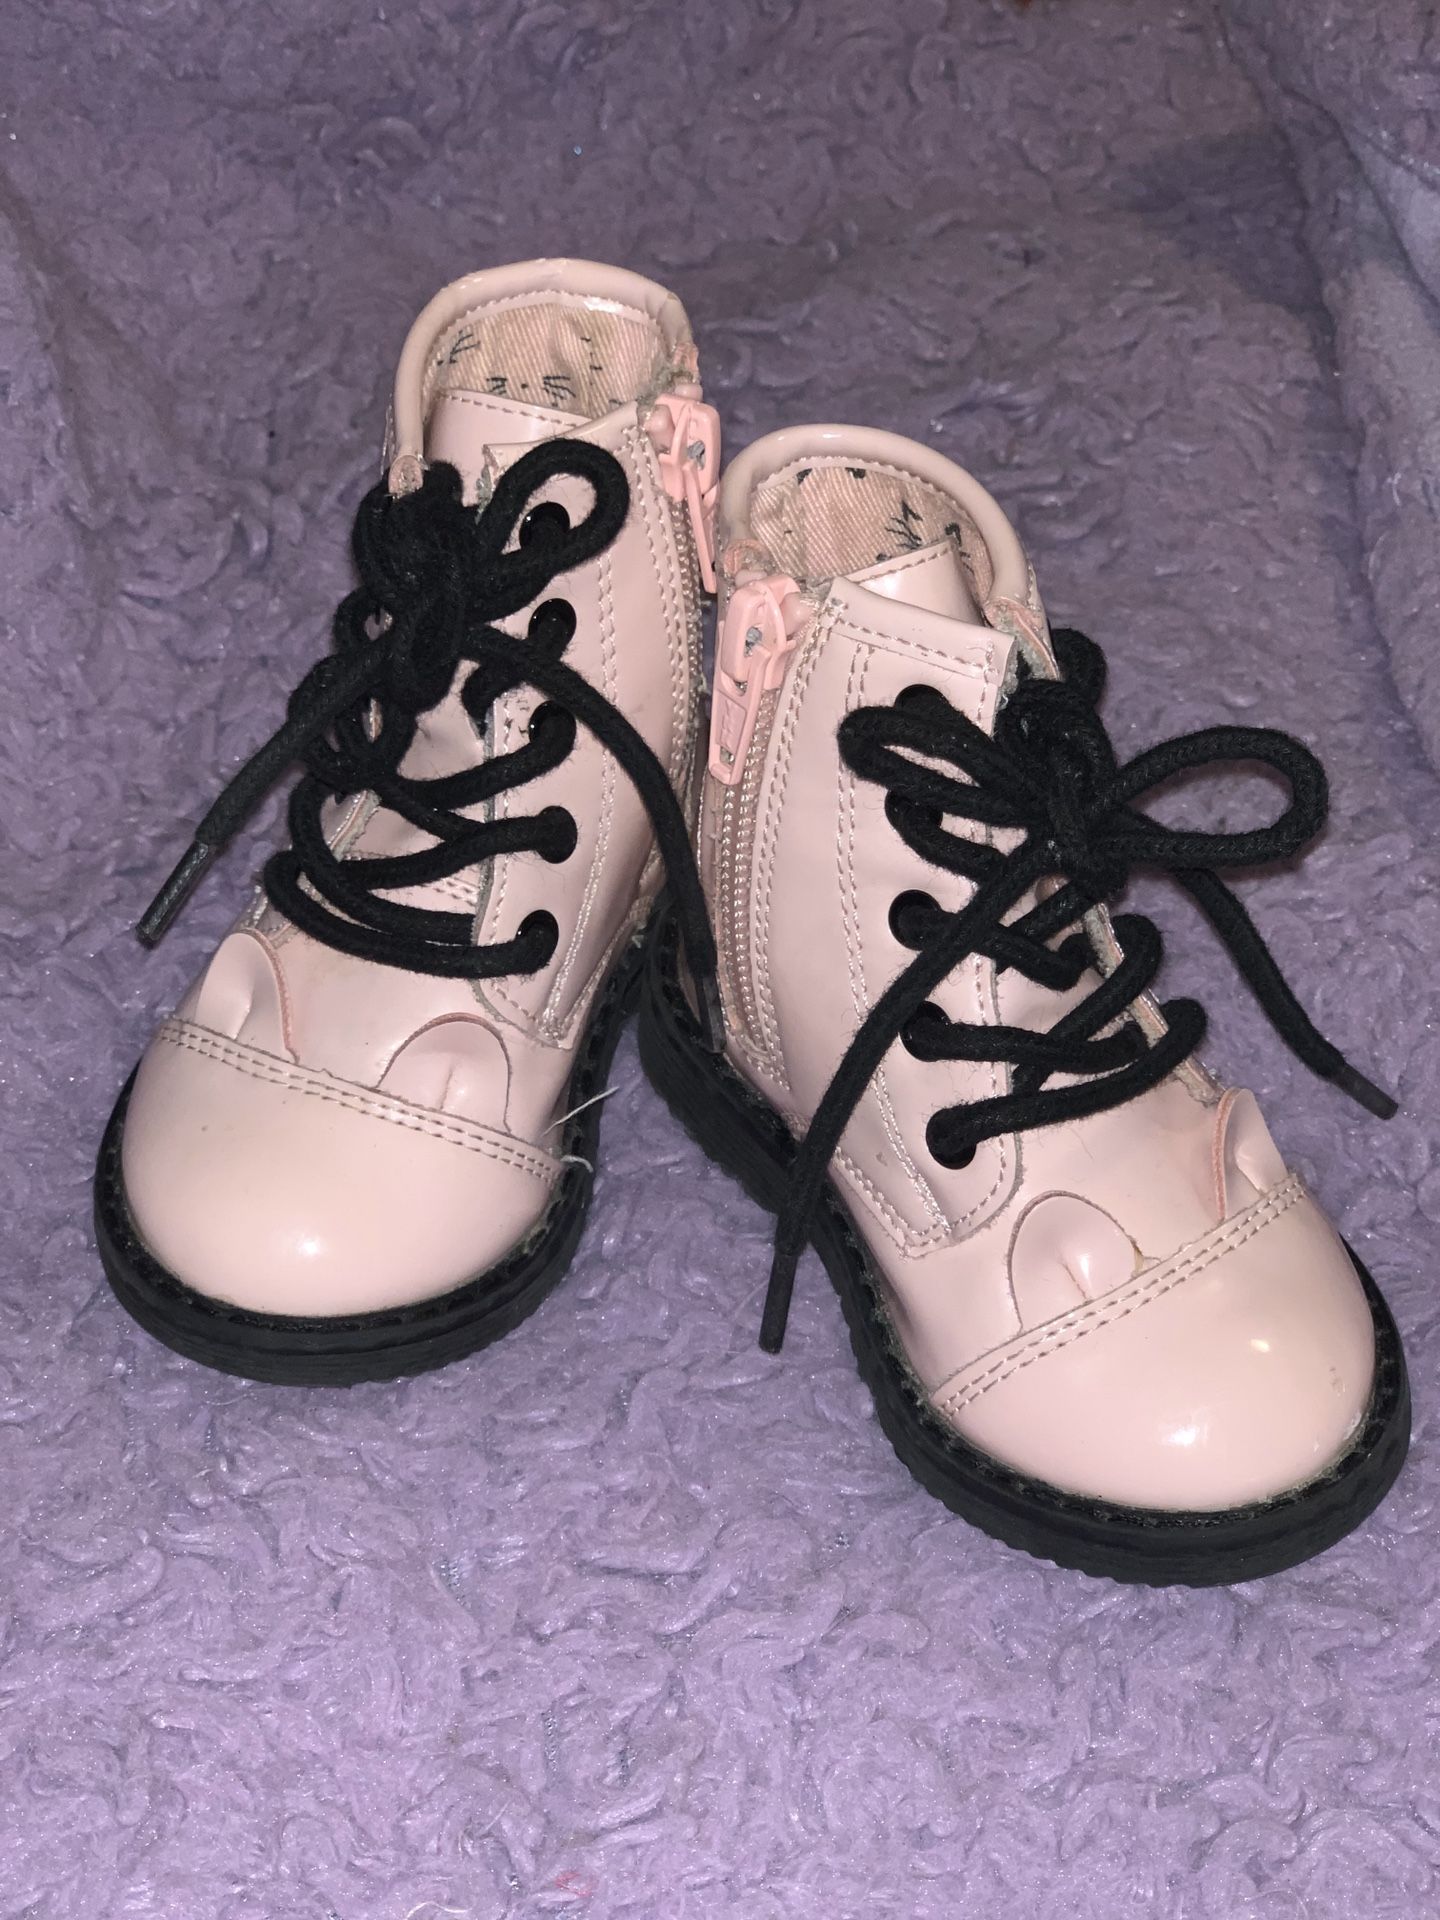 Toddler Boots Size 4